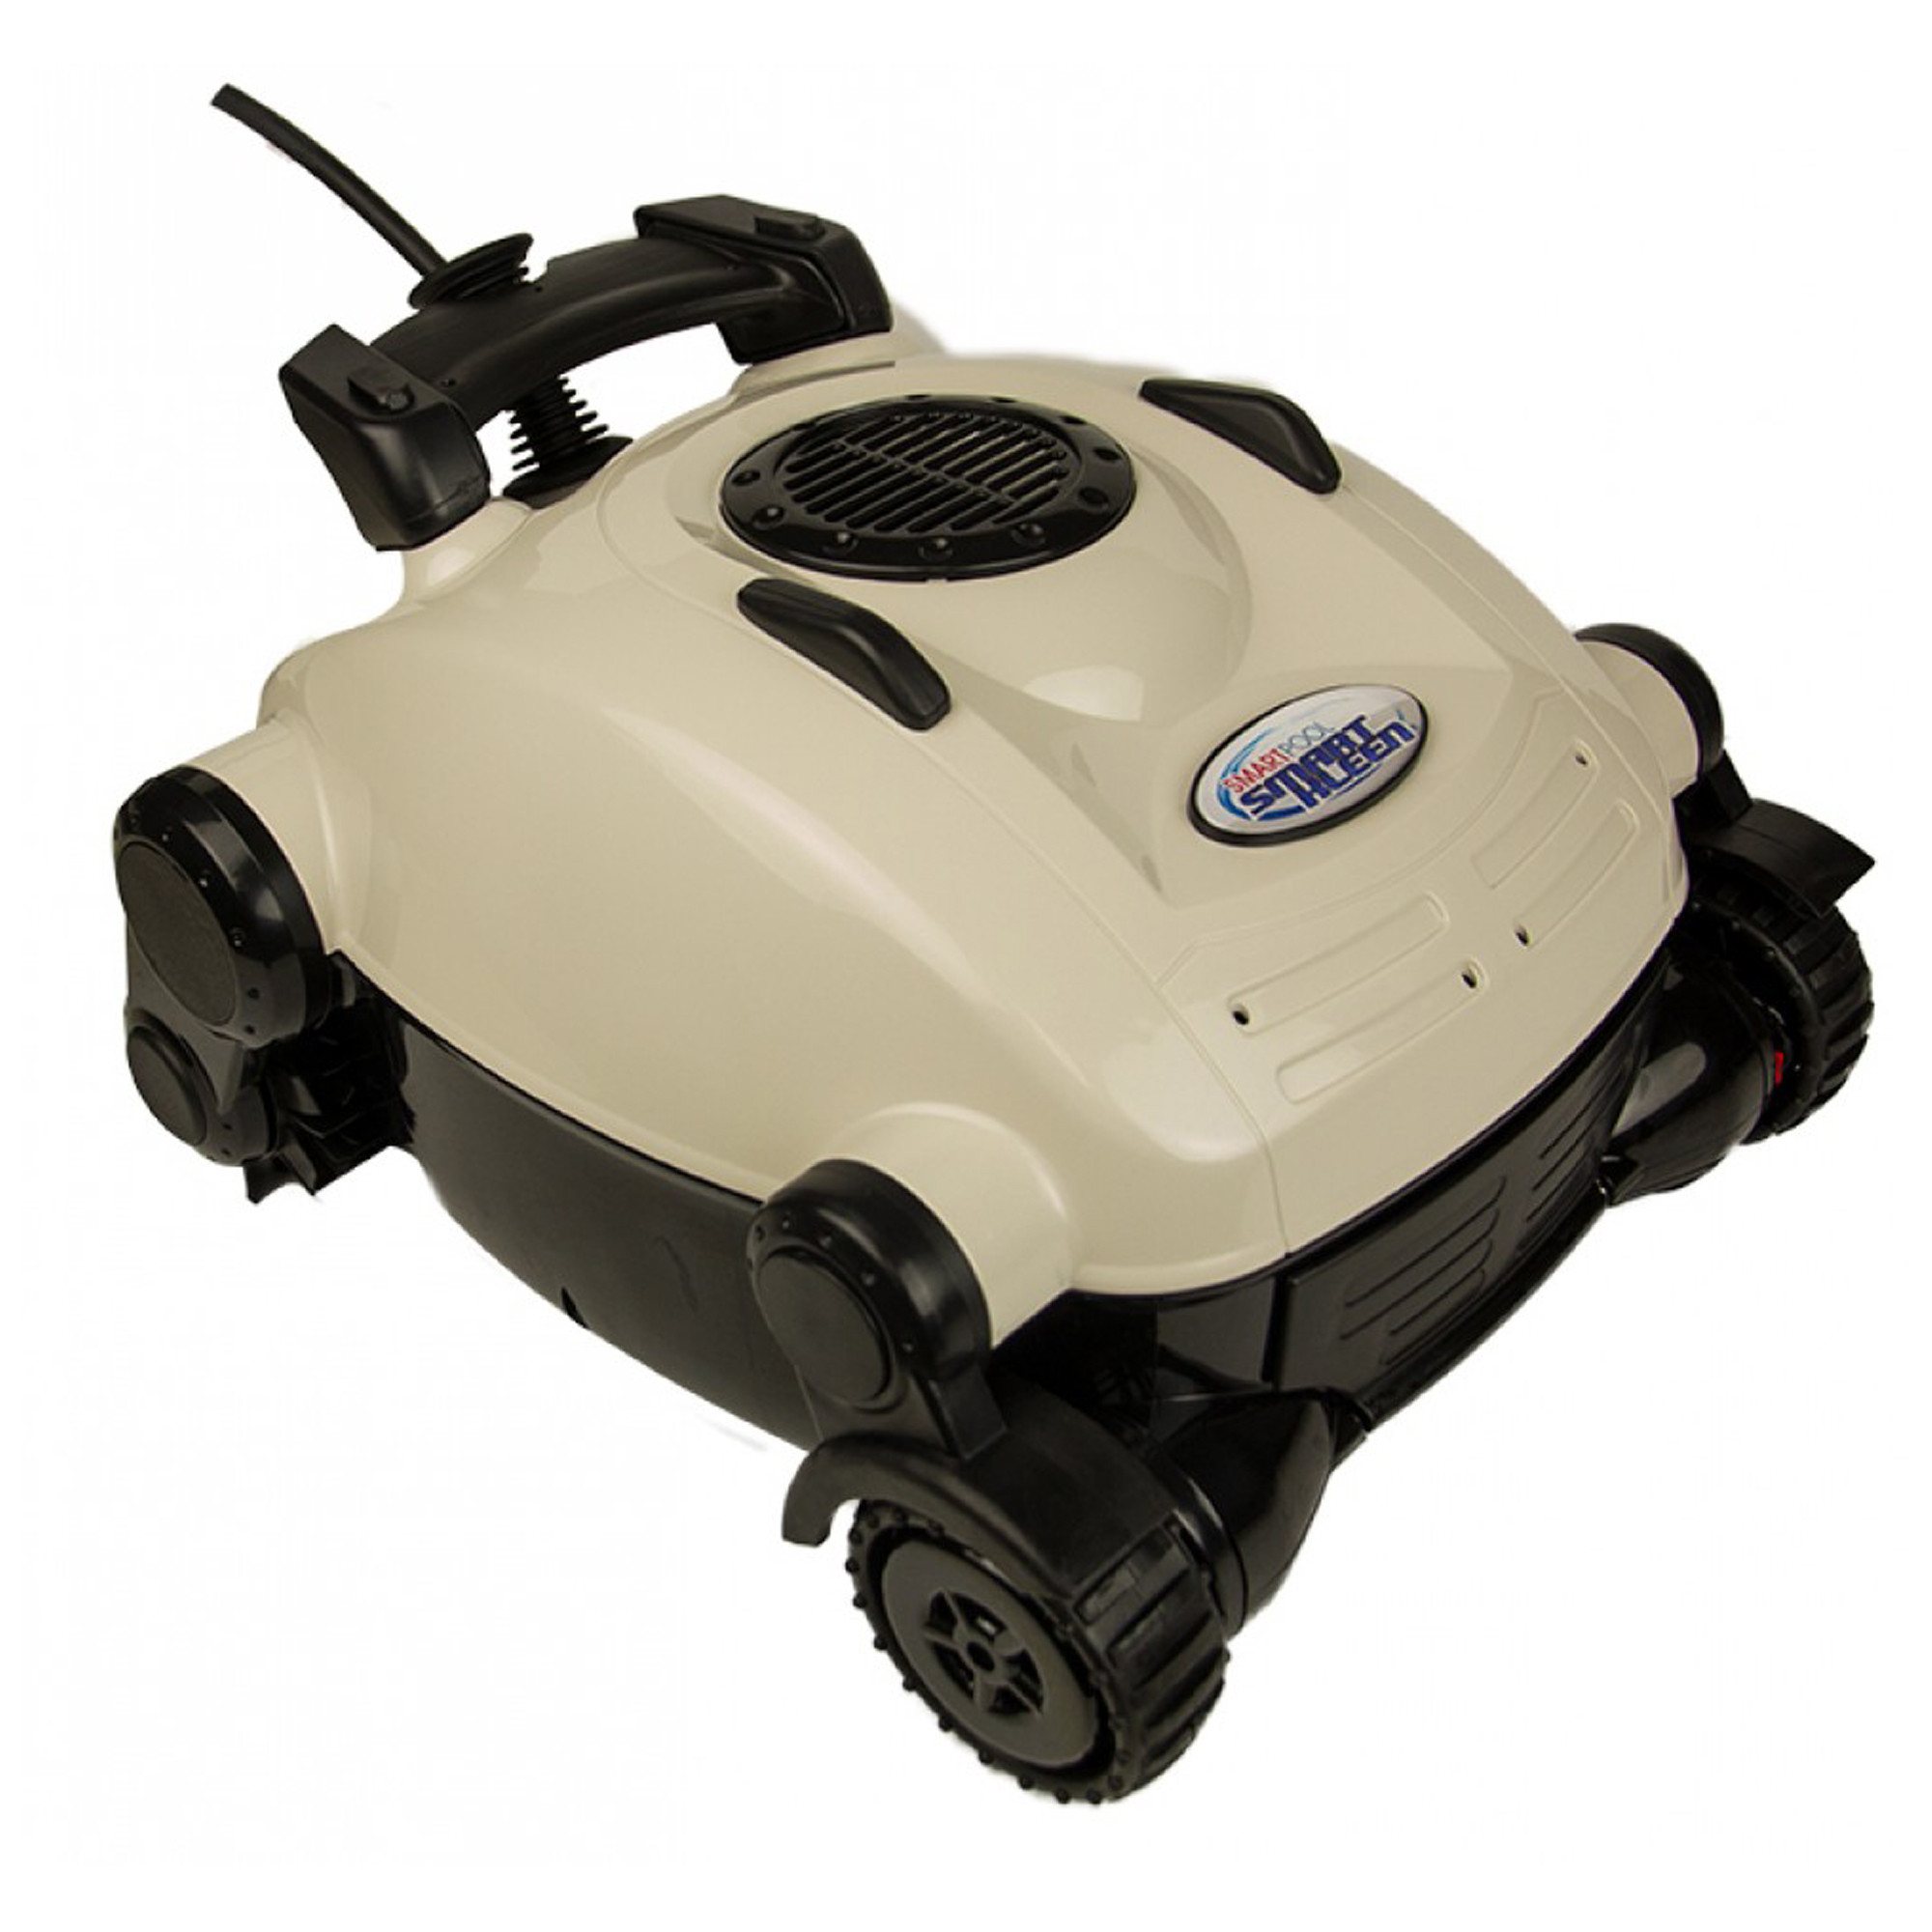 Robotic Above Ground Pool Cleaner - The Dashery Formal